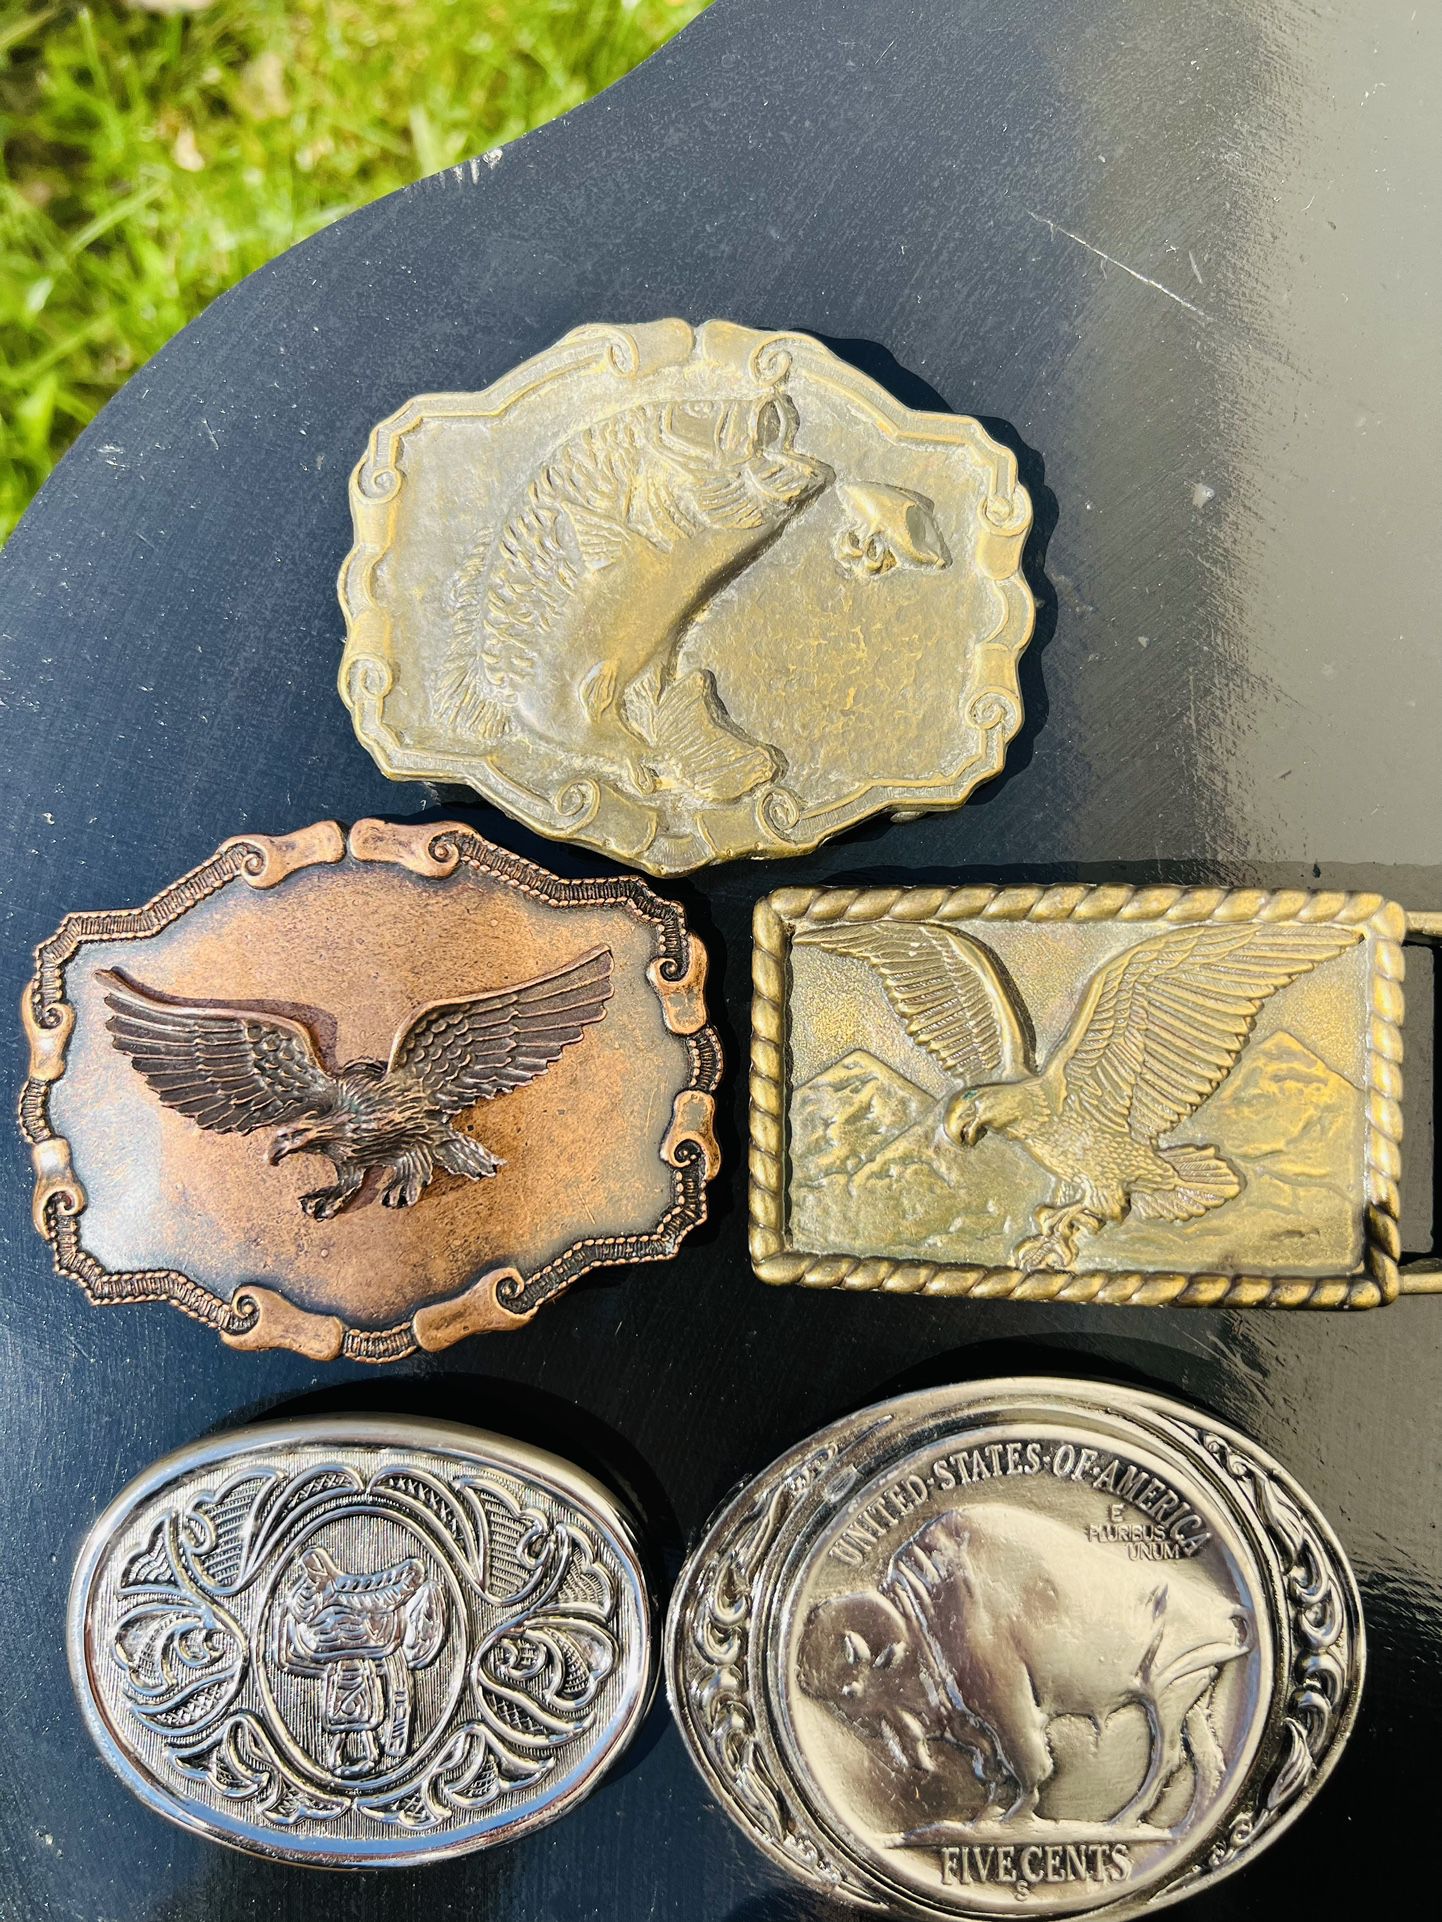 Cool Lot of 5 Vintage Used Belt Buckles, Mixed Themed